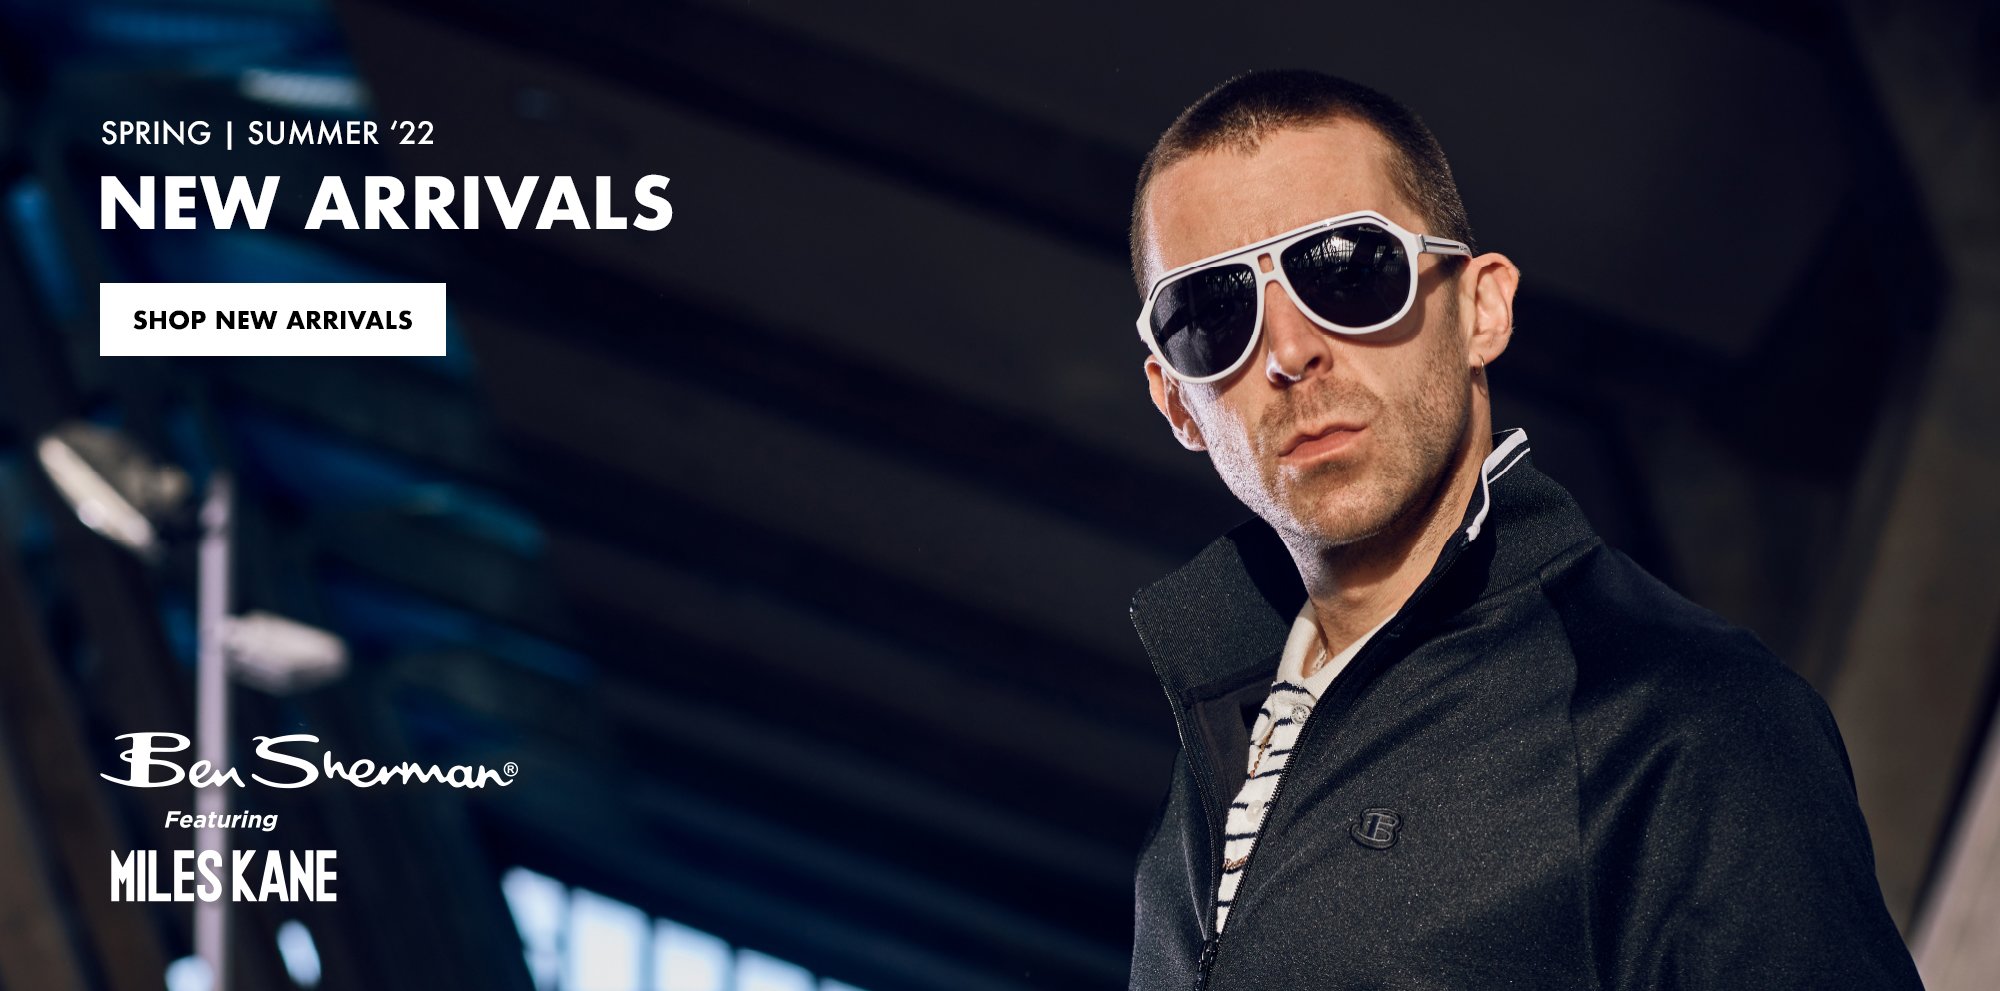 NEW ARRIVALS FEATURING MILES KANE